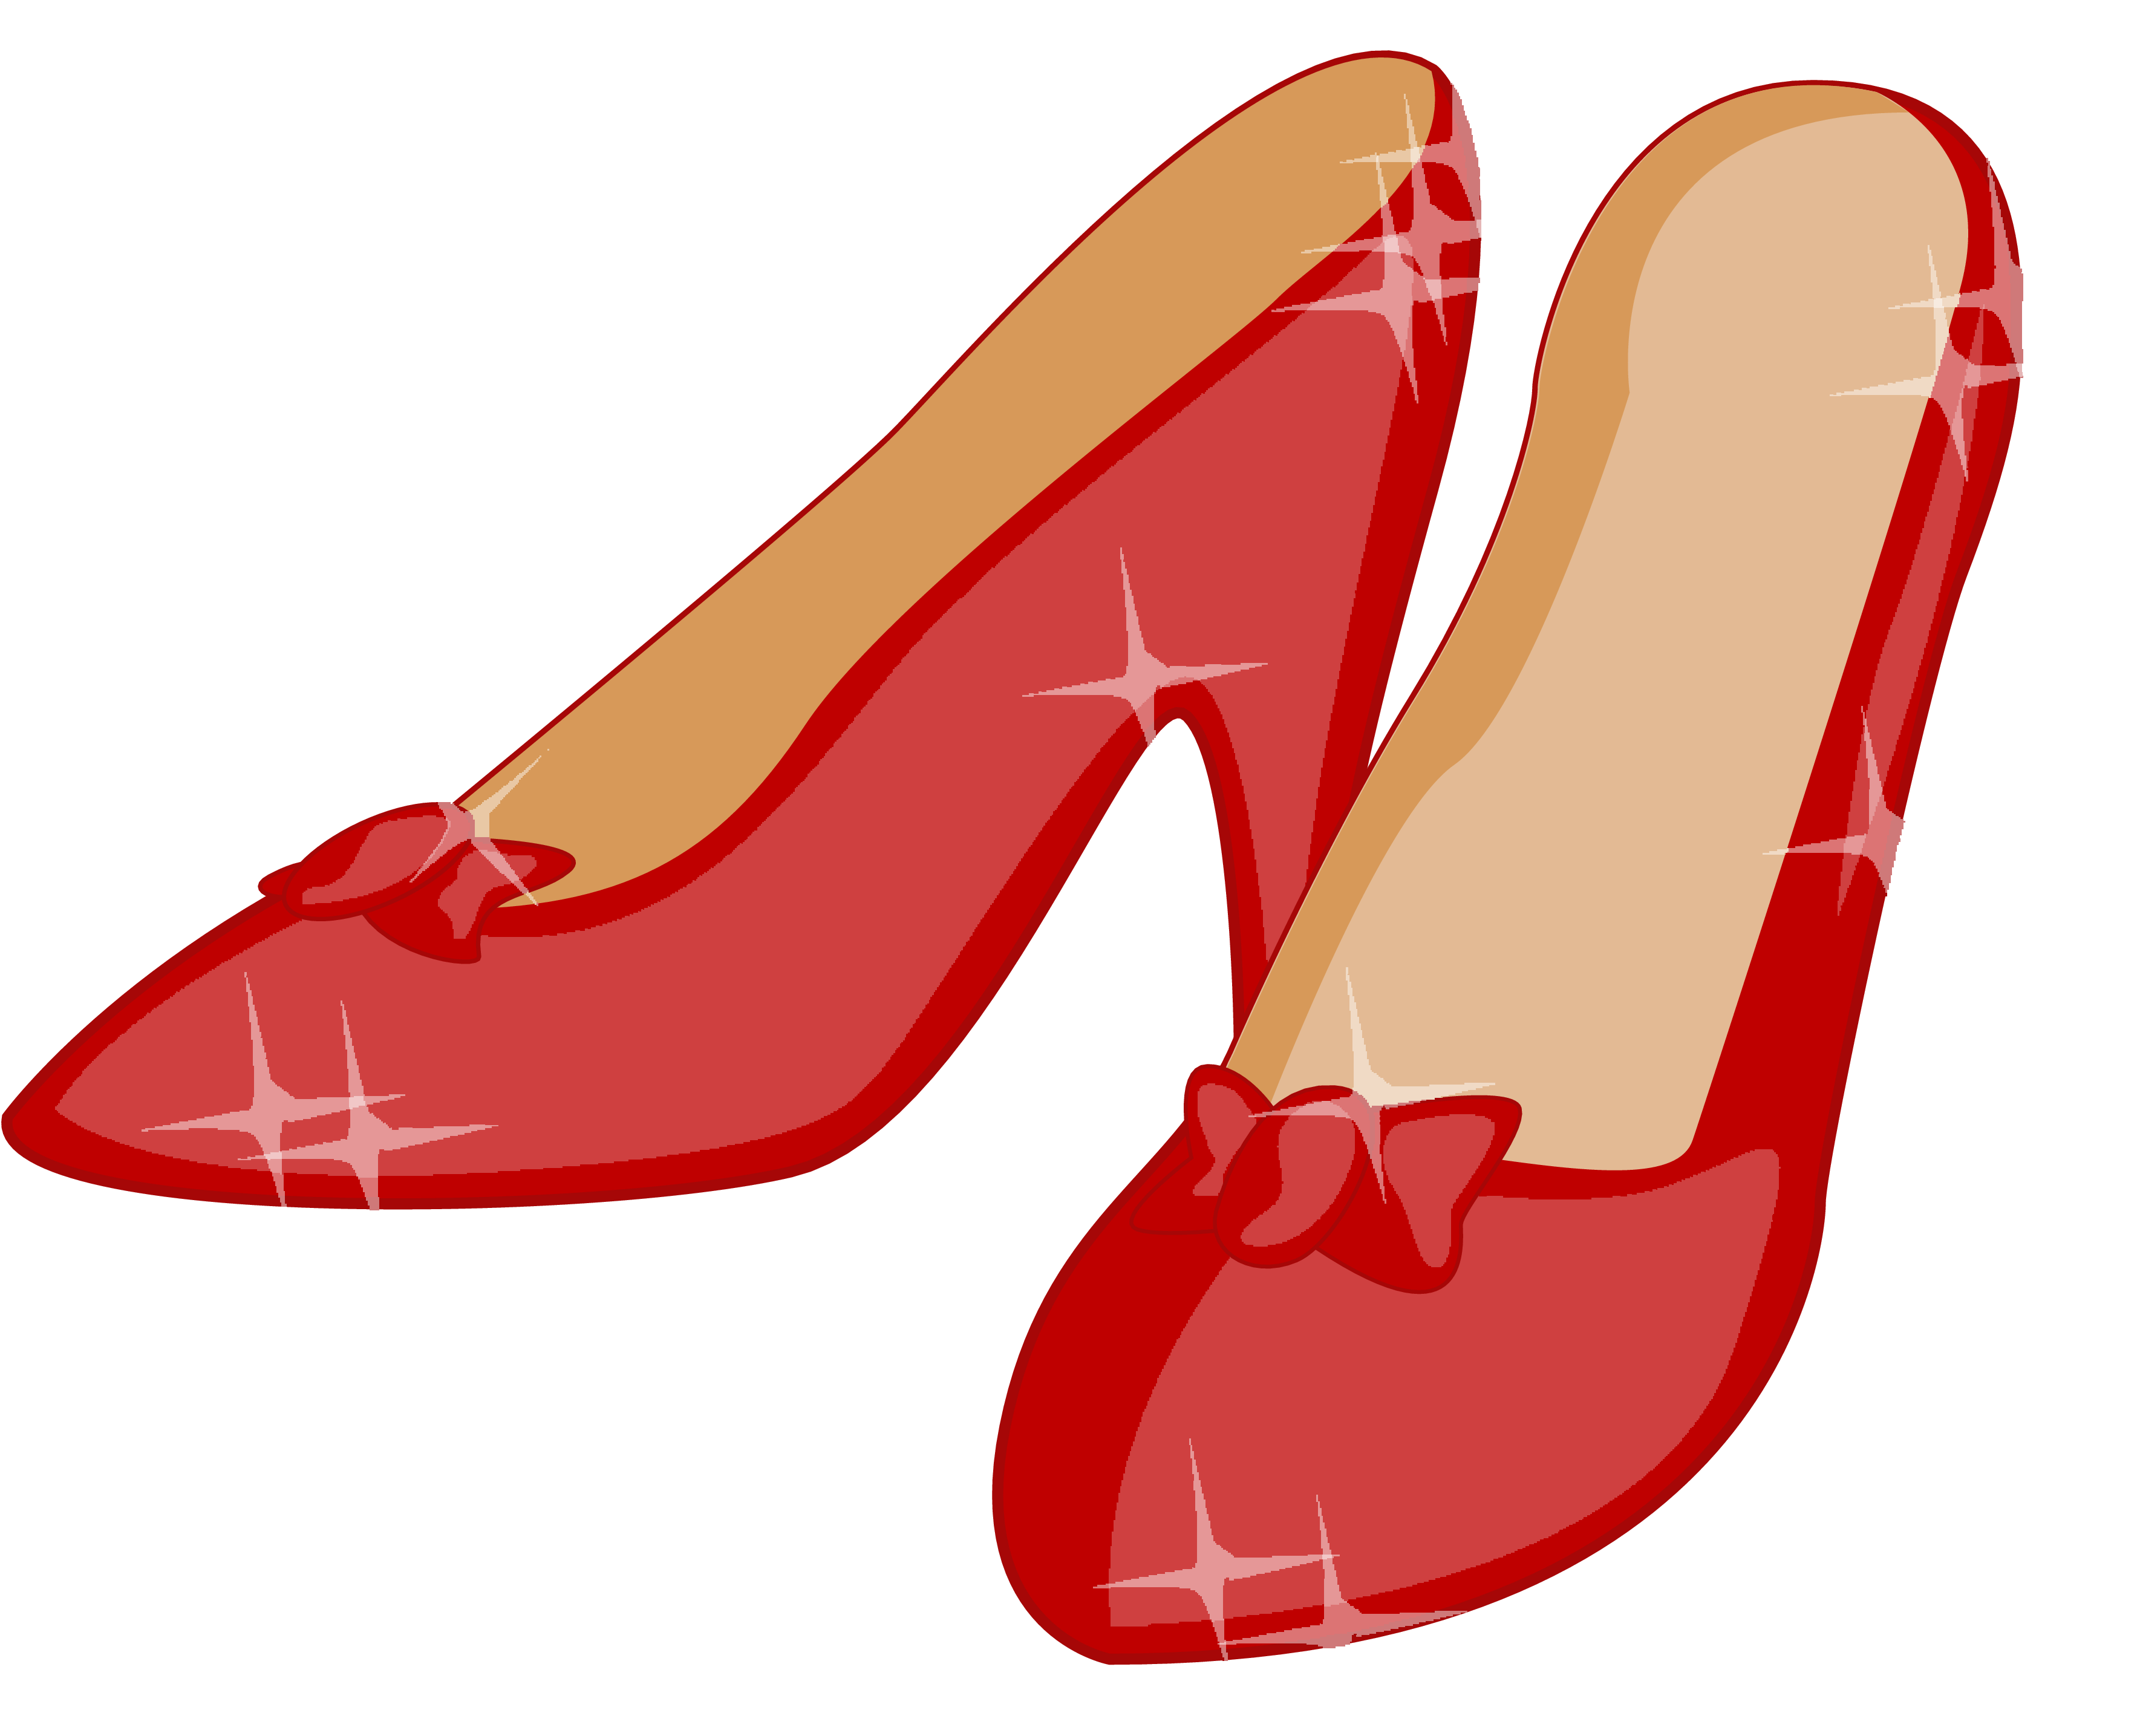 Ruby slippers Dorothy Gale Clip art